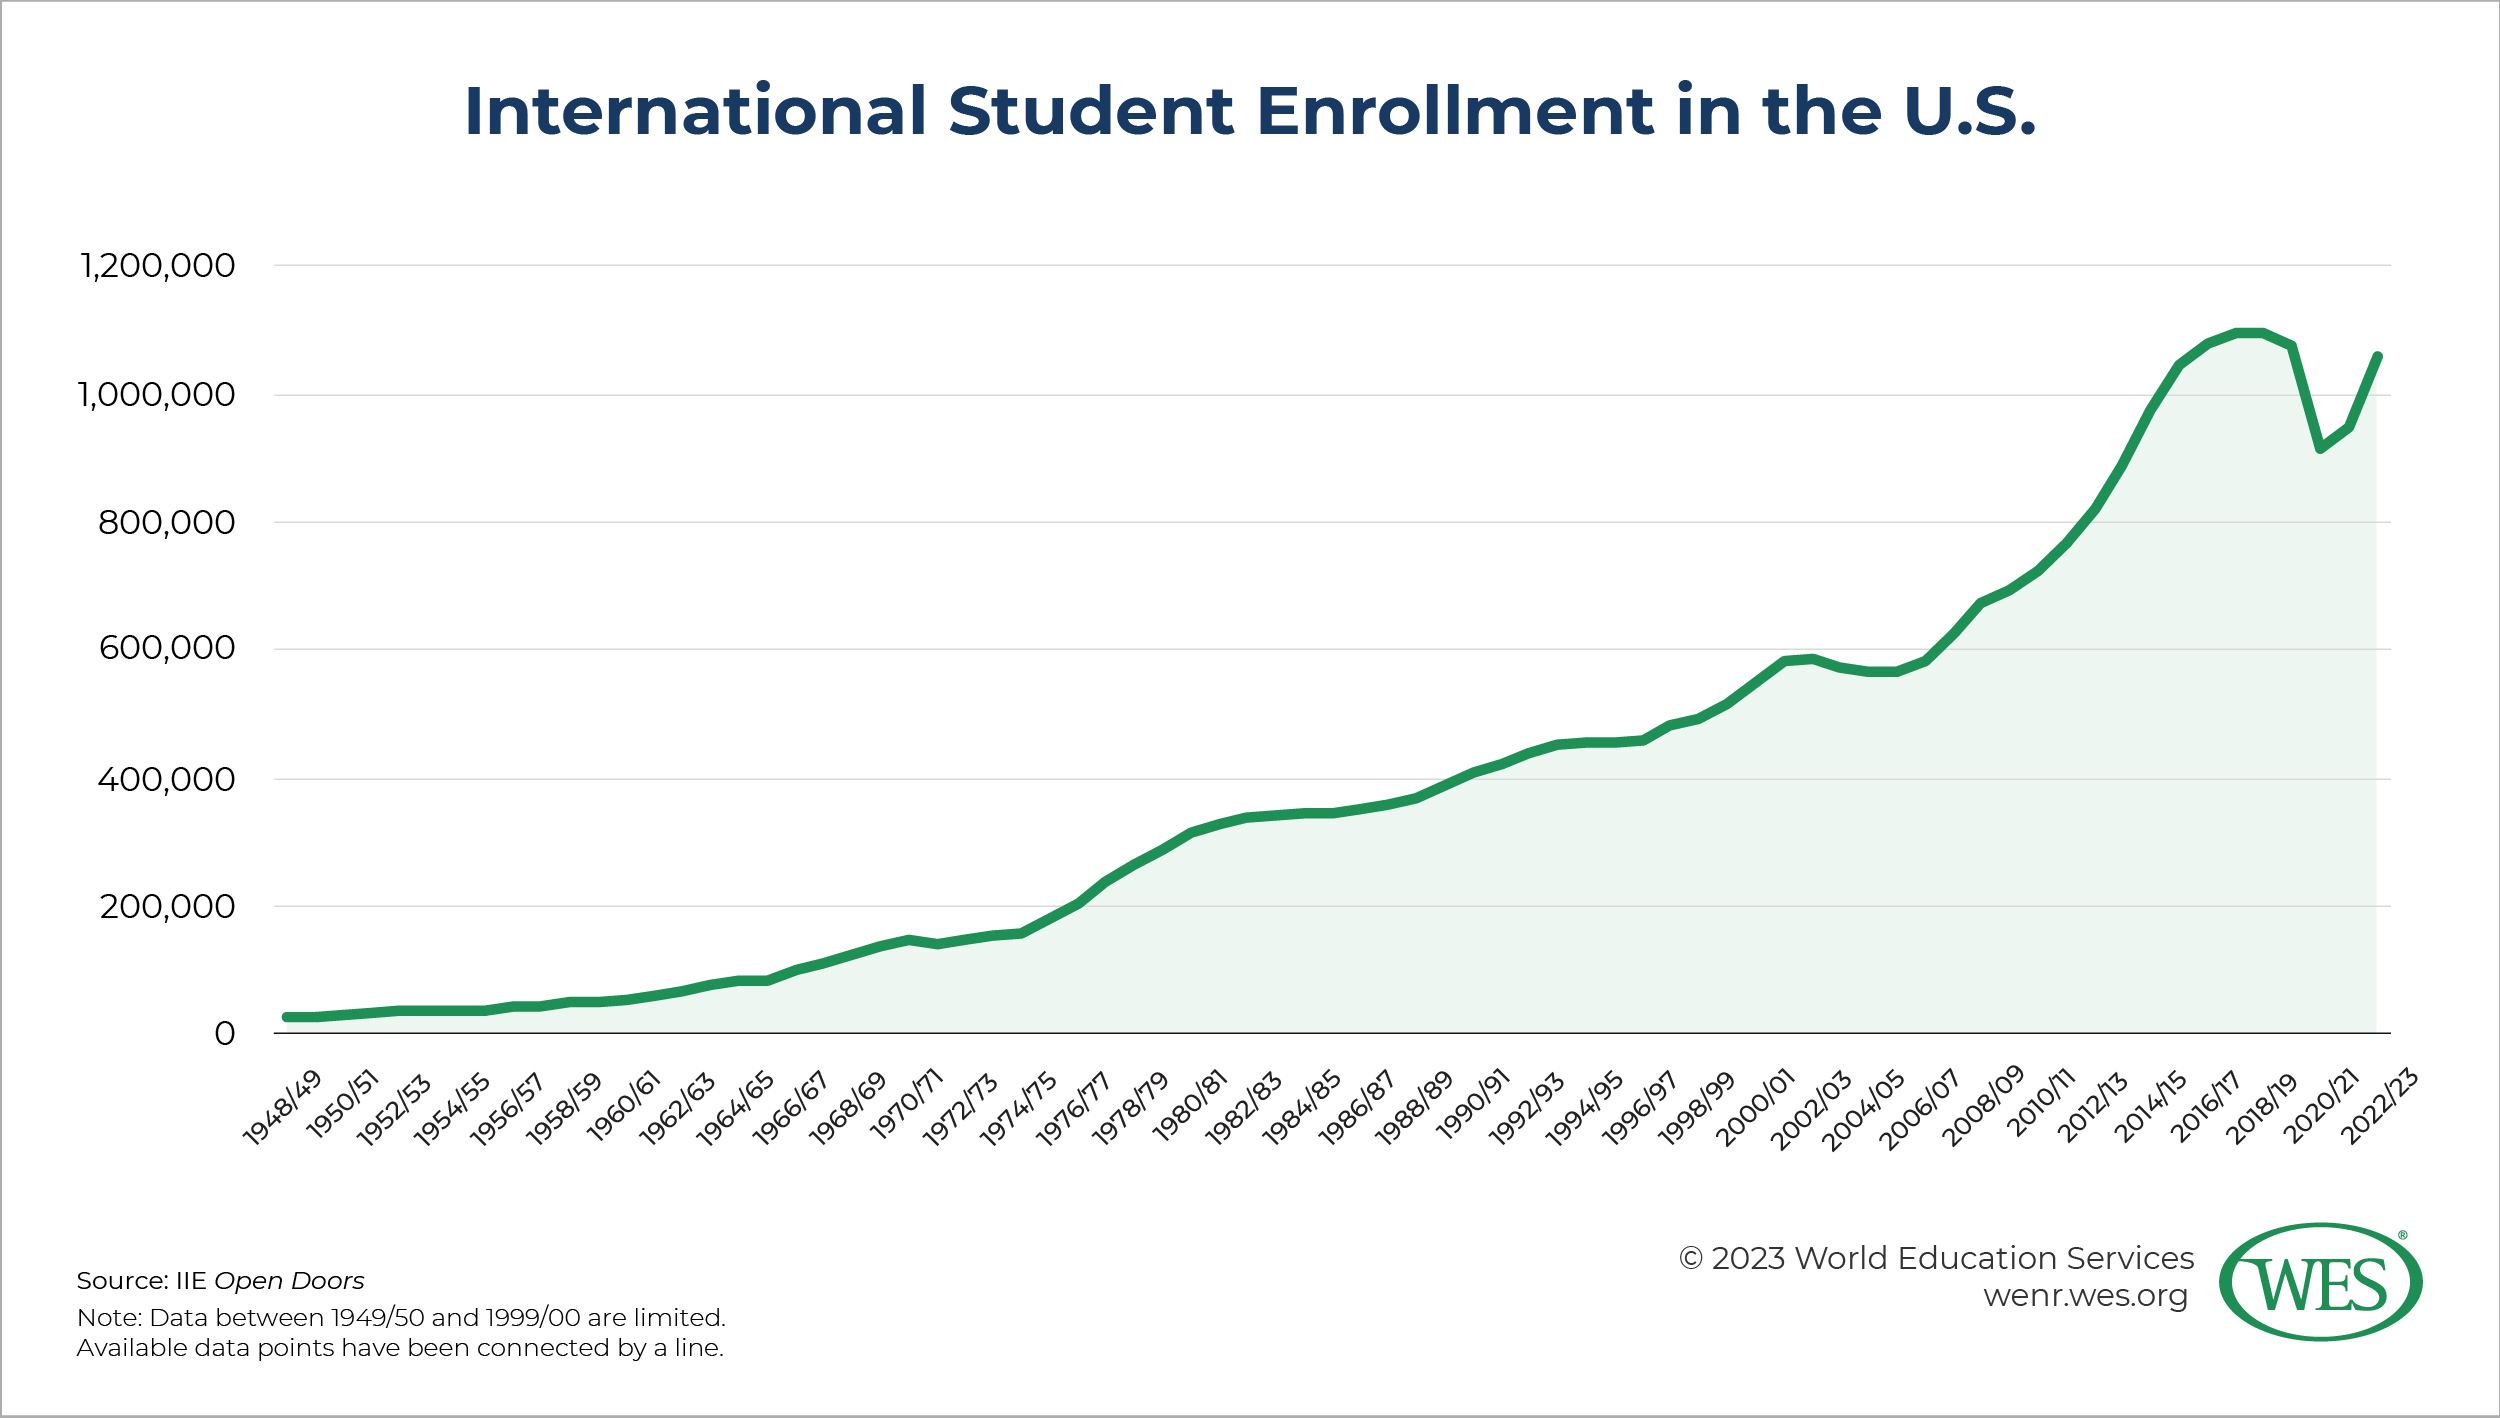 A chart showing international student enrollment in the U.S. from 1948/49 to 2022/23. 